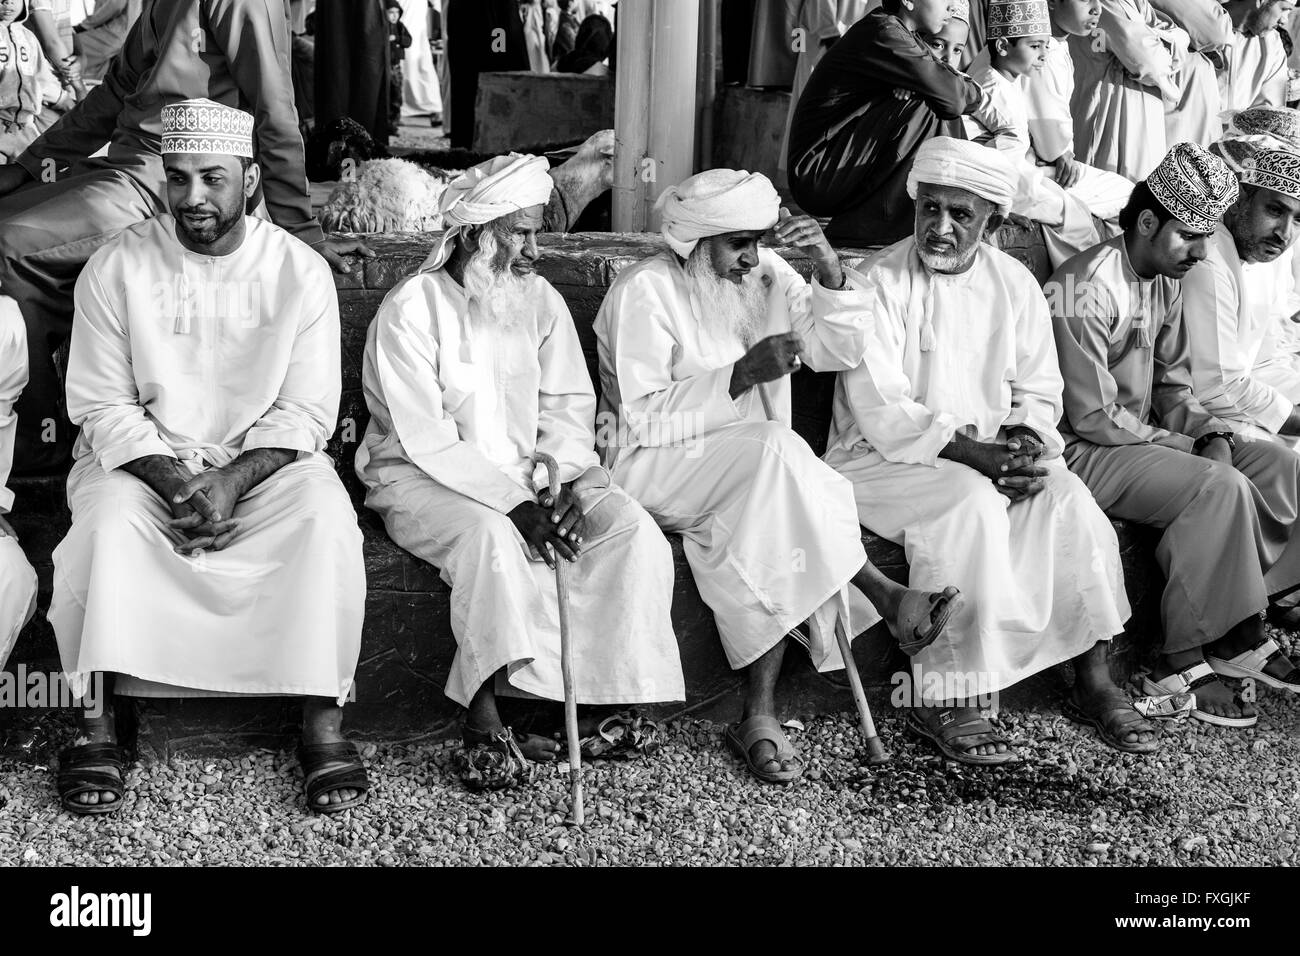 Omani clothes Black and White Stock Photos & Images - Alamy